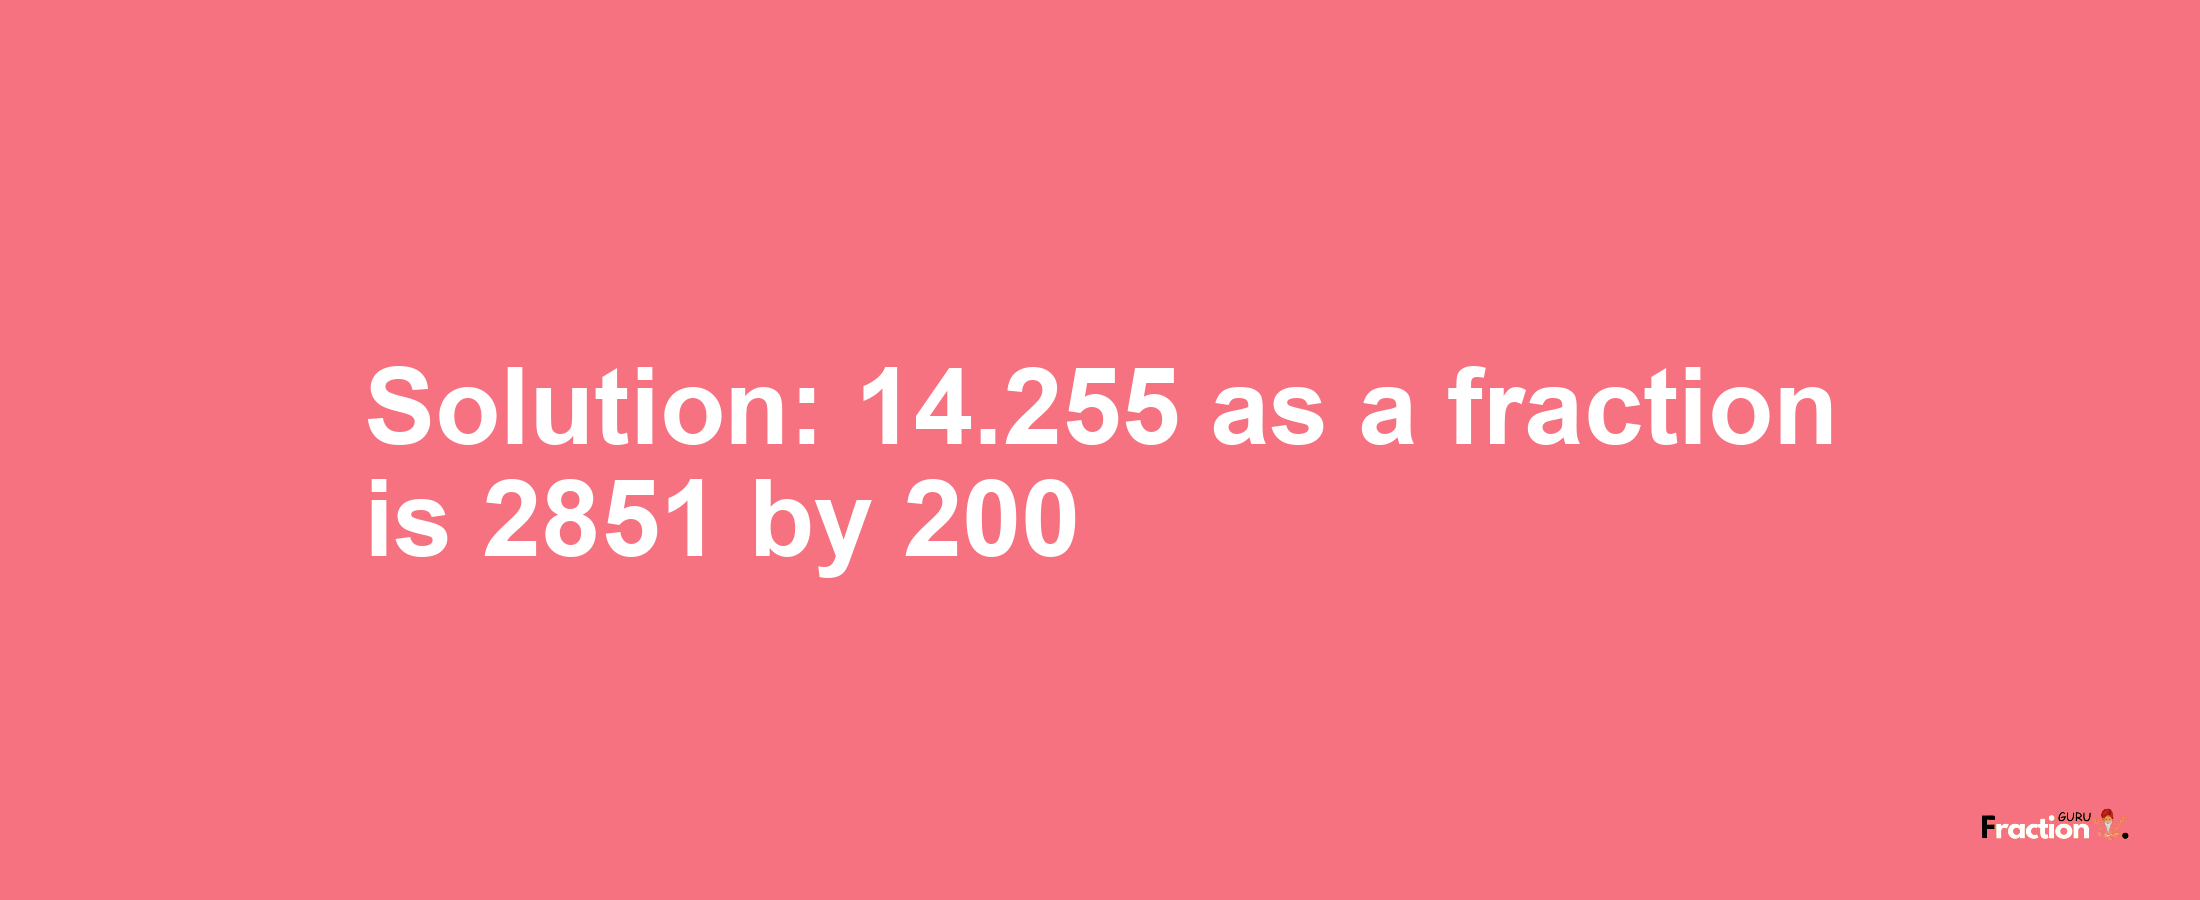 Solution:14.255 as a fraction is 2851/200